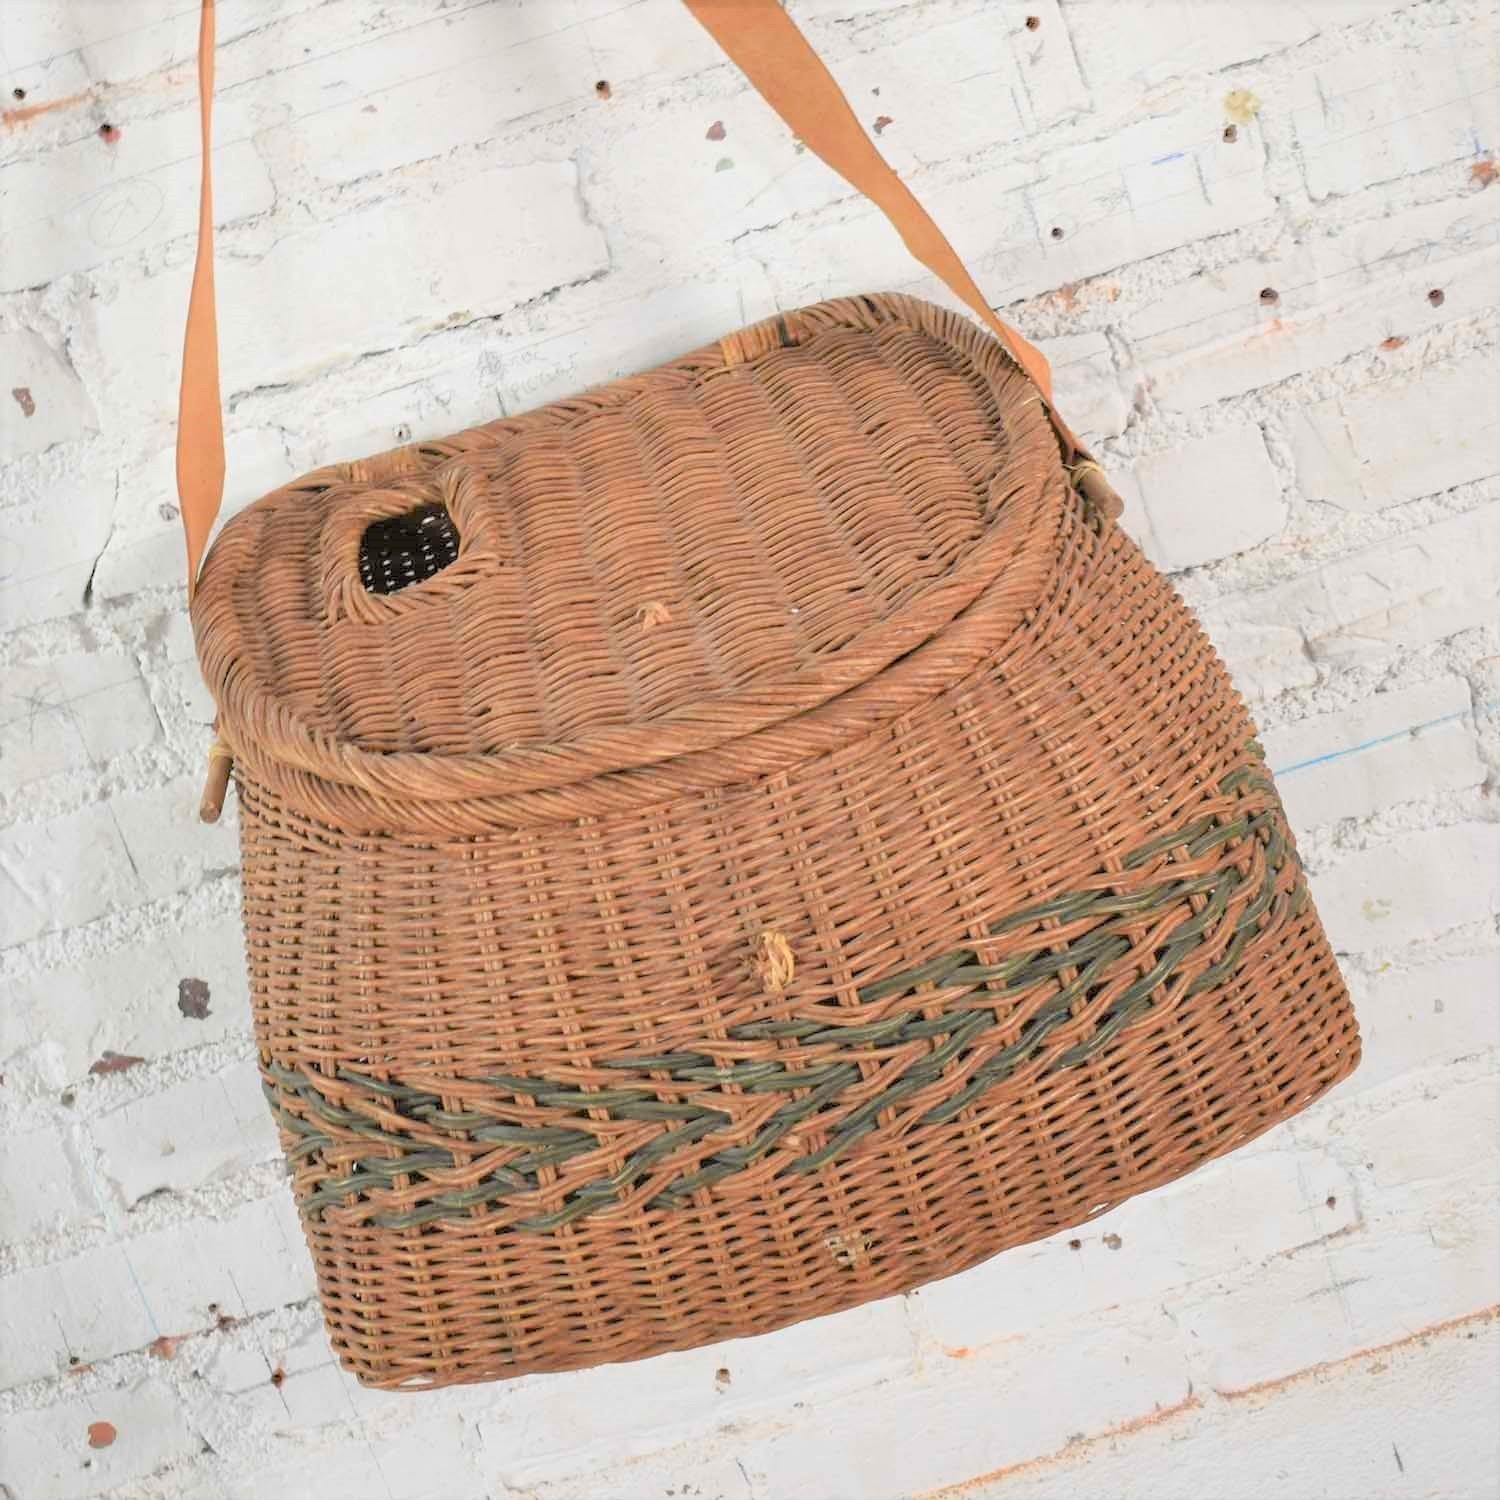 Rustic Antique Wicker Basket Fishing Creel with Leather Strap Handle